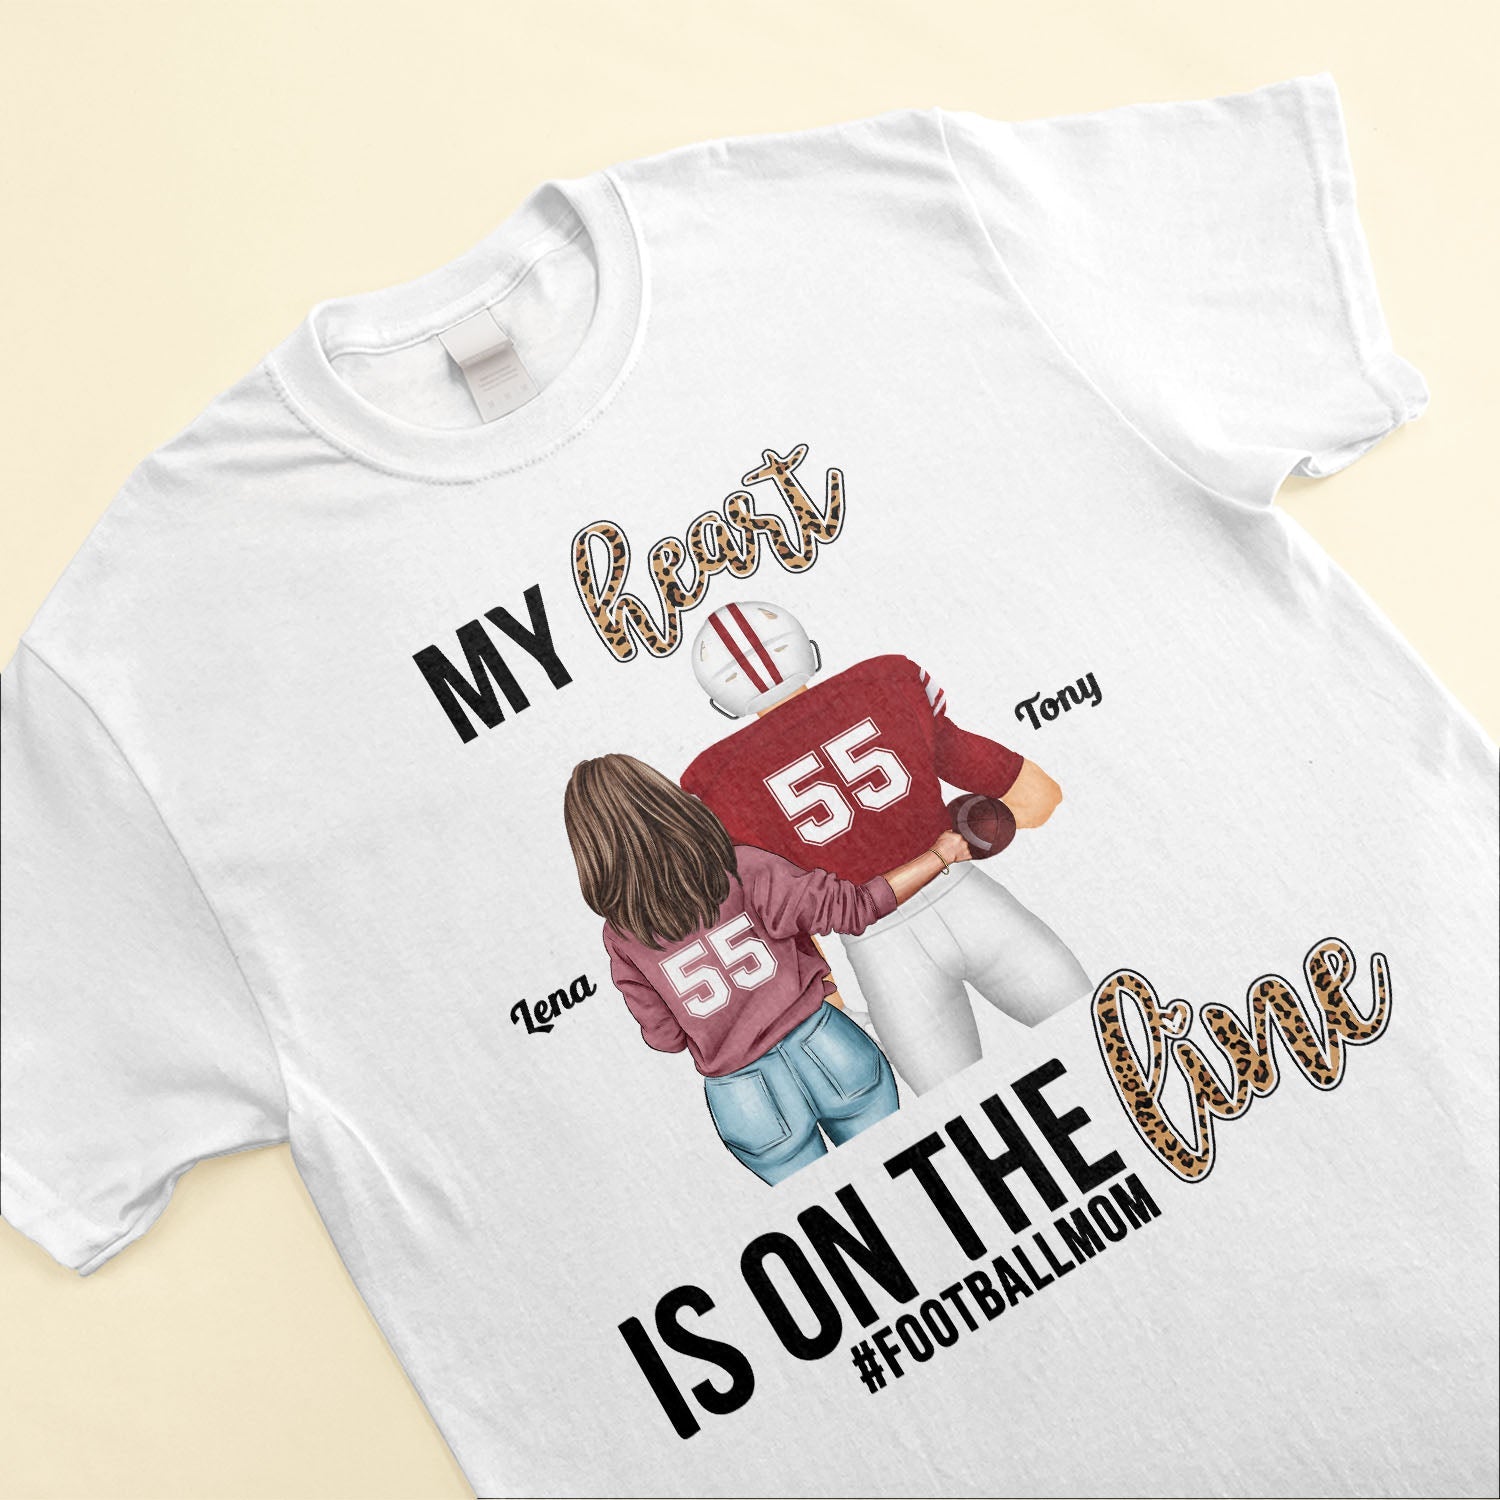 Girlfriend of Football Player Tshirt Mother of the Football 